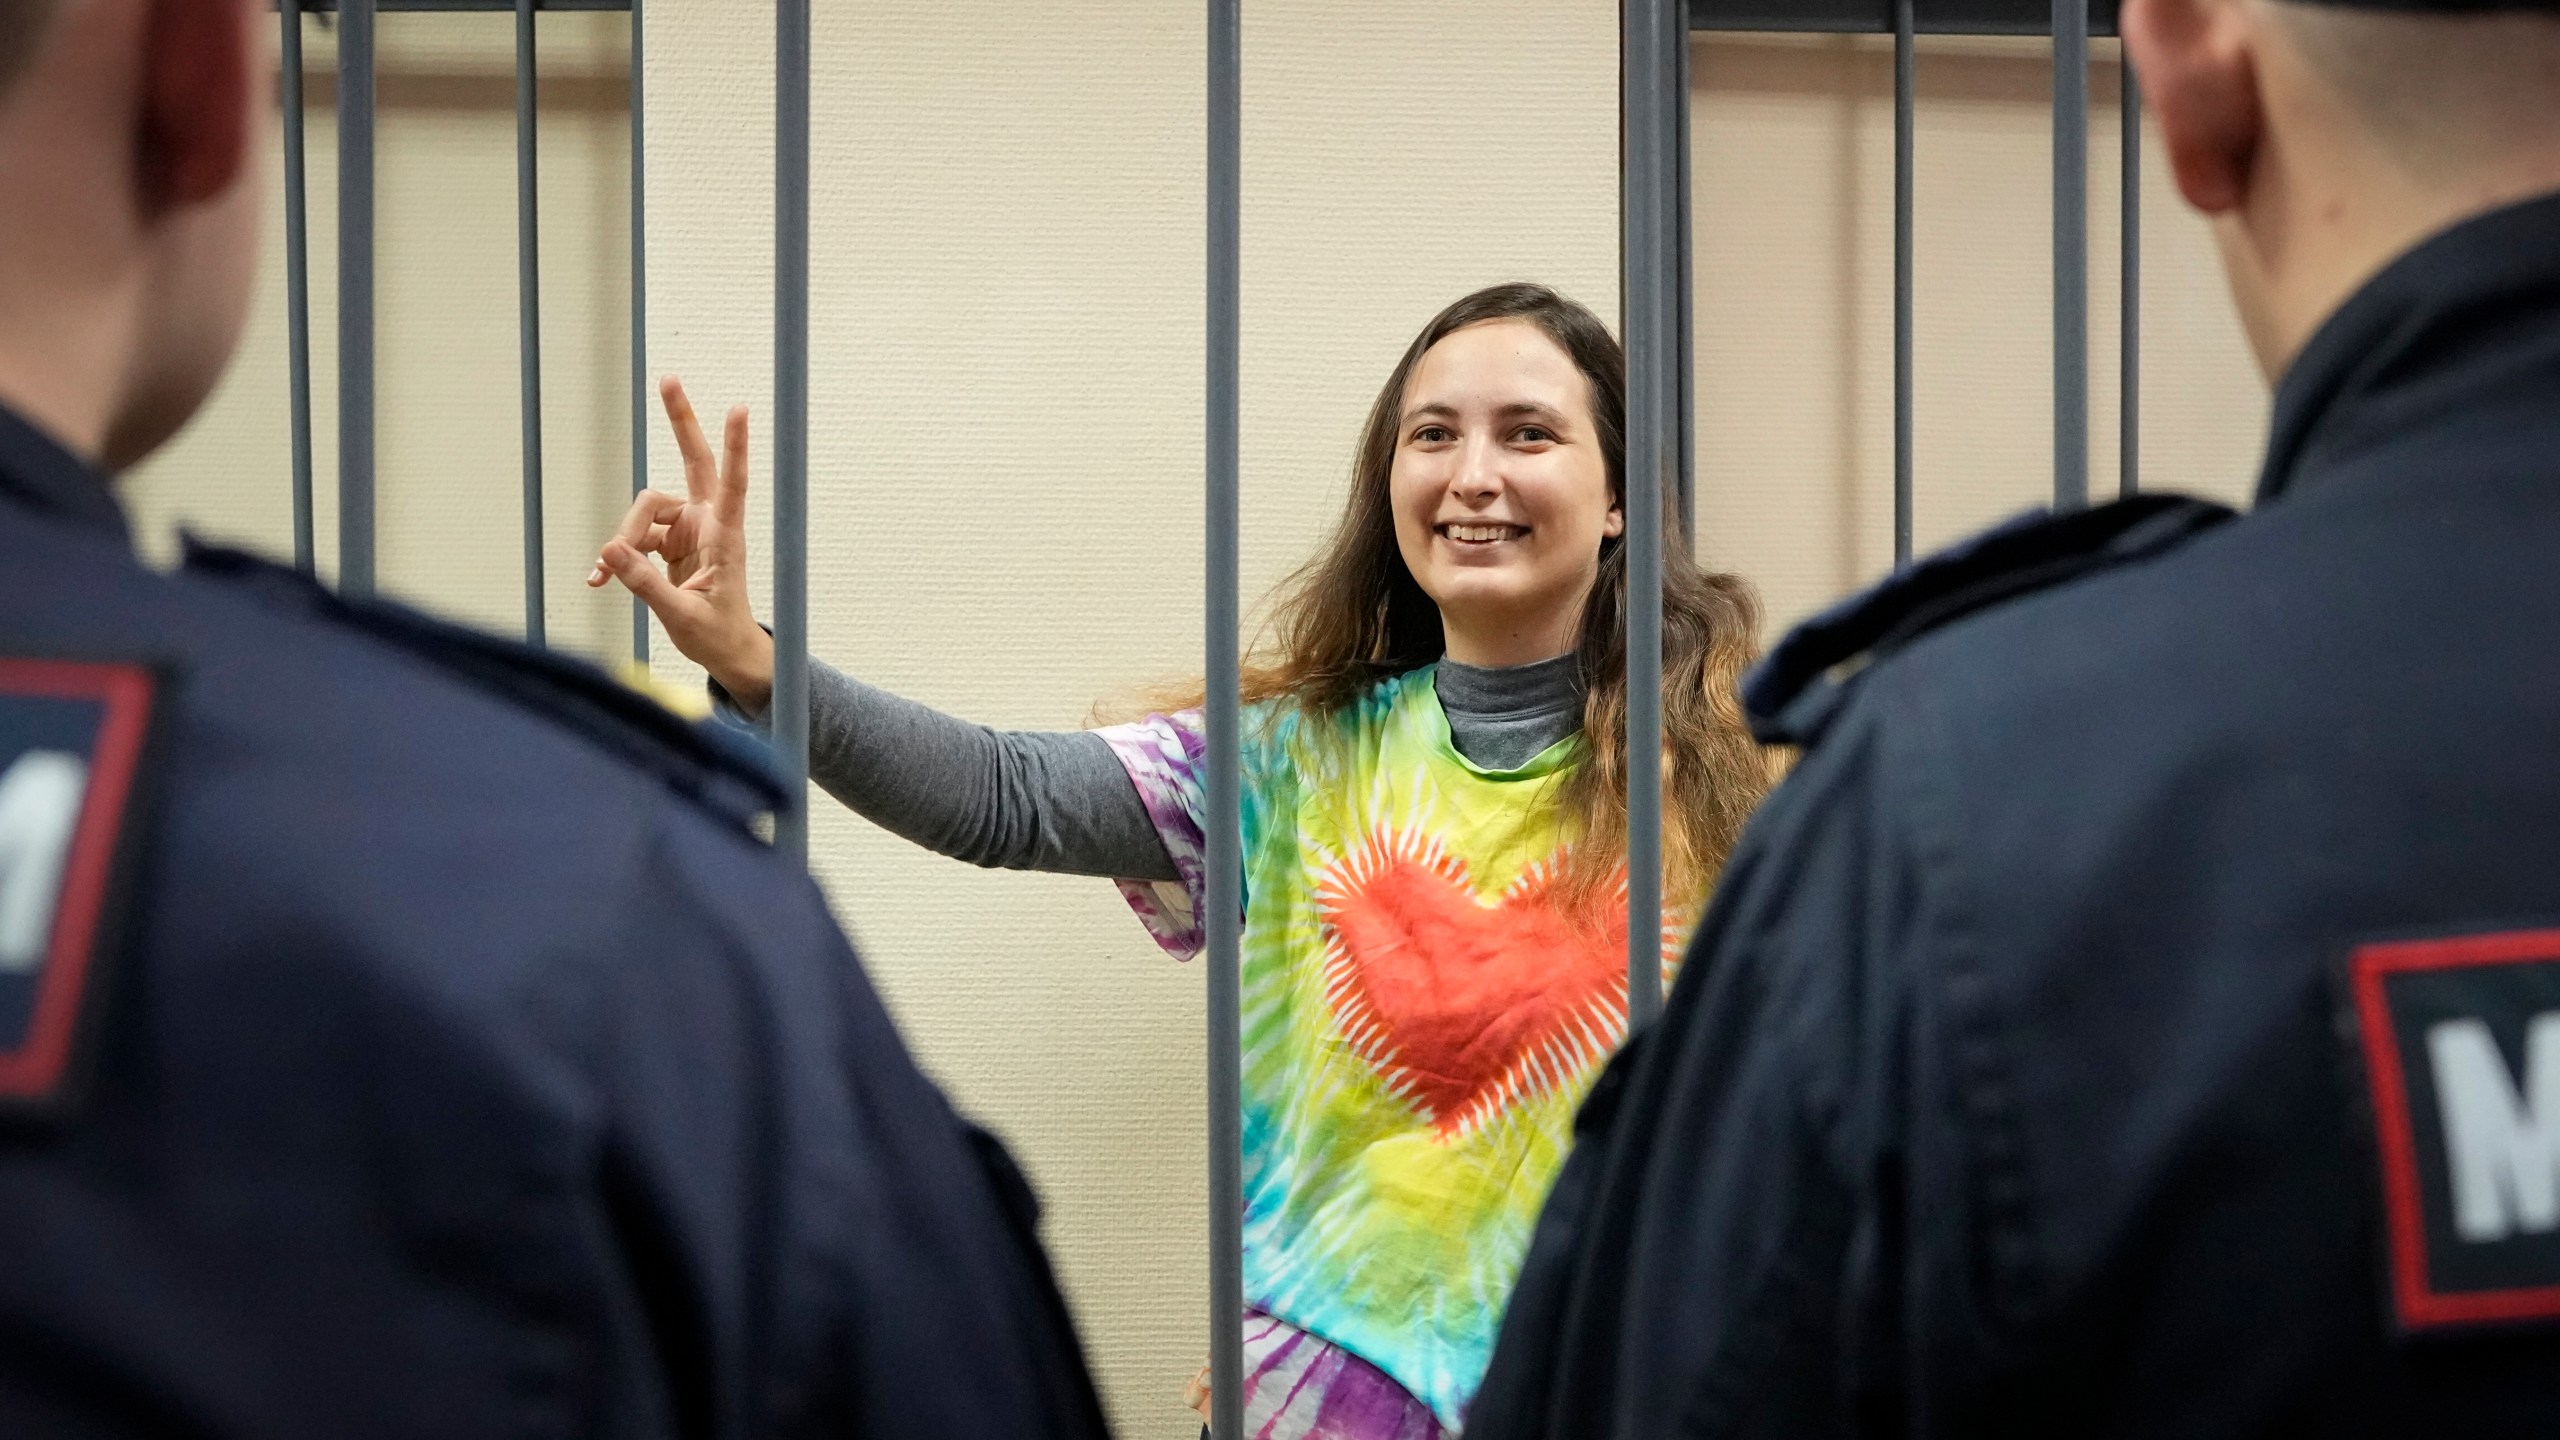 FILE - Sasha Skochilenko, a 33-year-old artist and musician, makes a victory sign standing behind bars in court in St. Petersburg, Russia, Thursday, Nov. 16, 2023, for protesting the conflict in Ukraine. Over the last decade, Vladimir Putin's Russia evolved from a country that tolerates at least some dissent to one that ruthlessly suppresses it. Arrests, trials and long prison terms — once rare — are commonplace. (AP Photo, File)